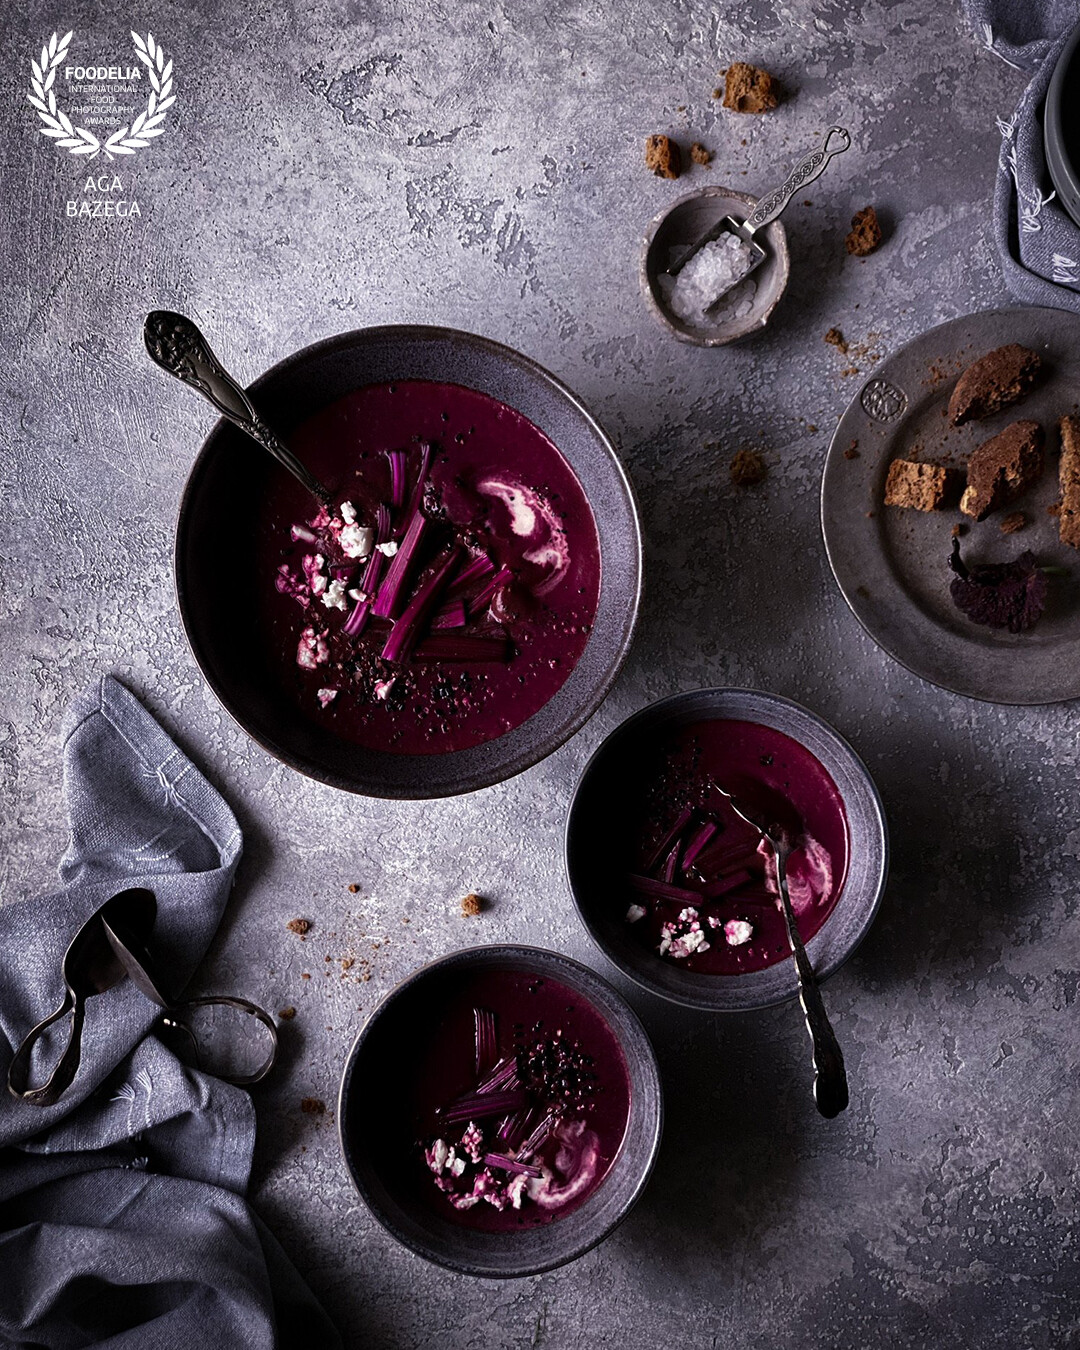 Beet soup served with sour cream and feta cheese.